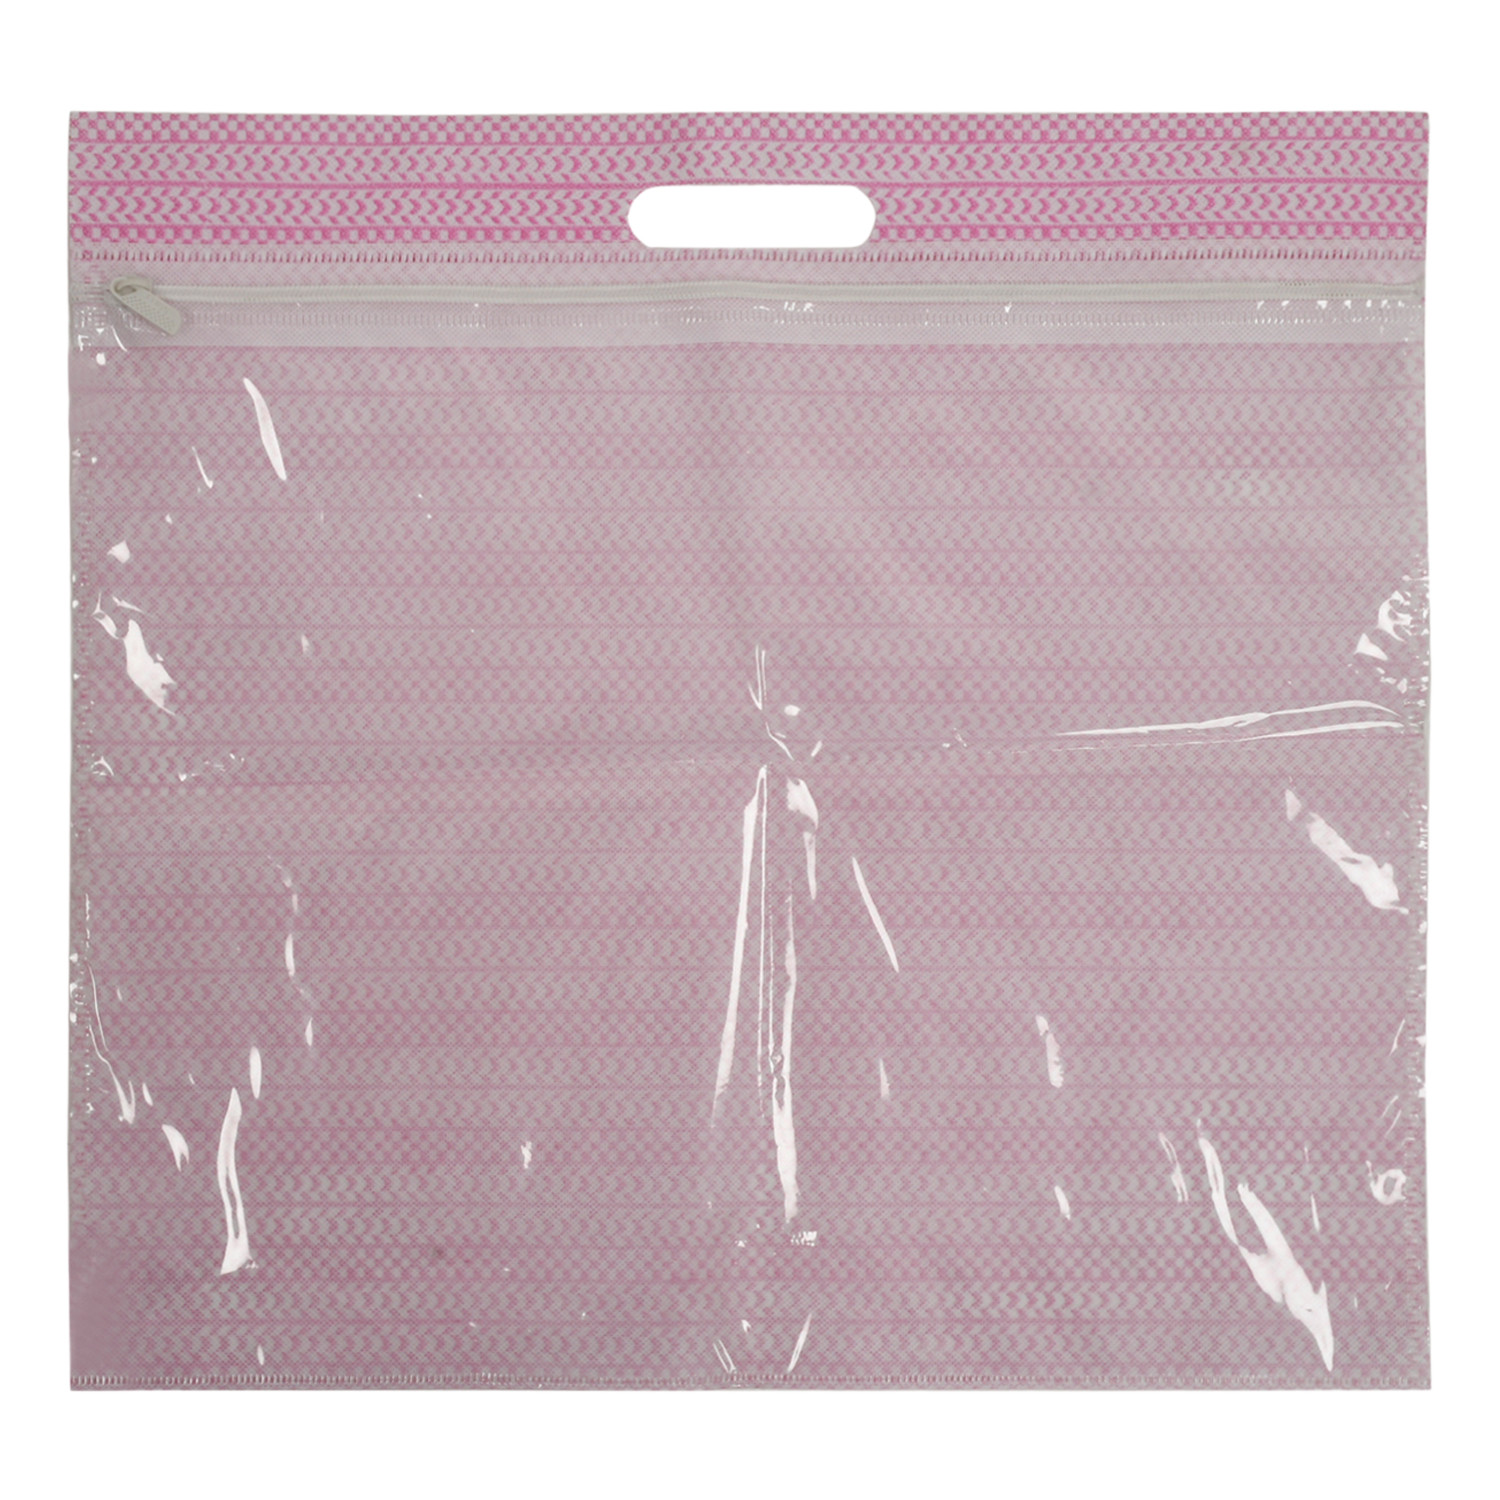 Kuber Industries Non-Woven Single Saree Covers With Transparent Window With Handle Pack of 24 (Purple & Pink)